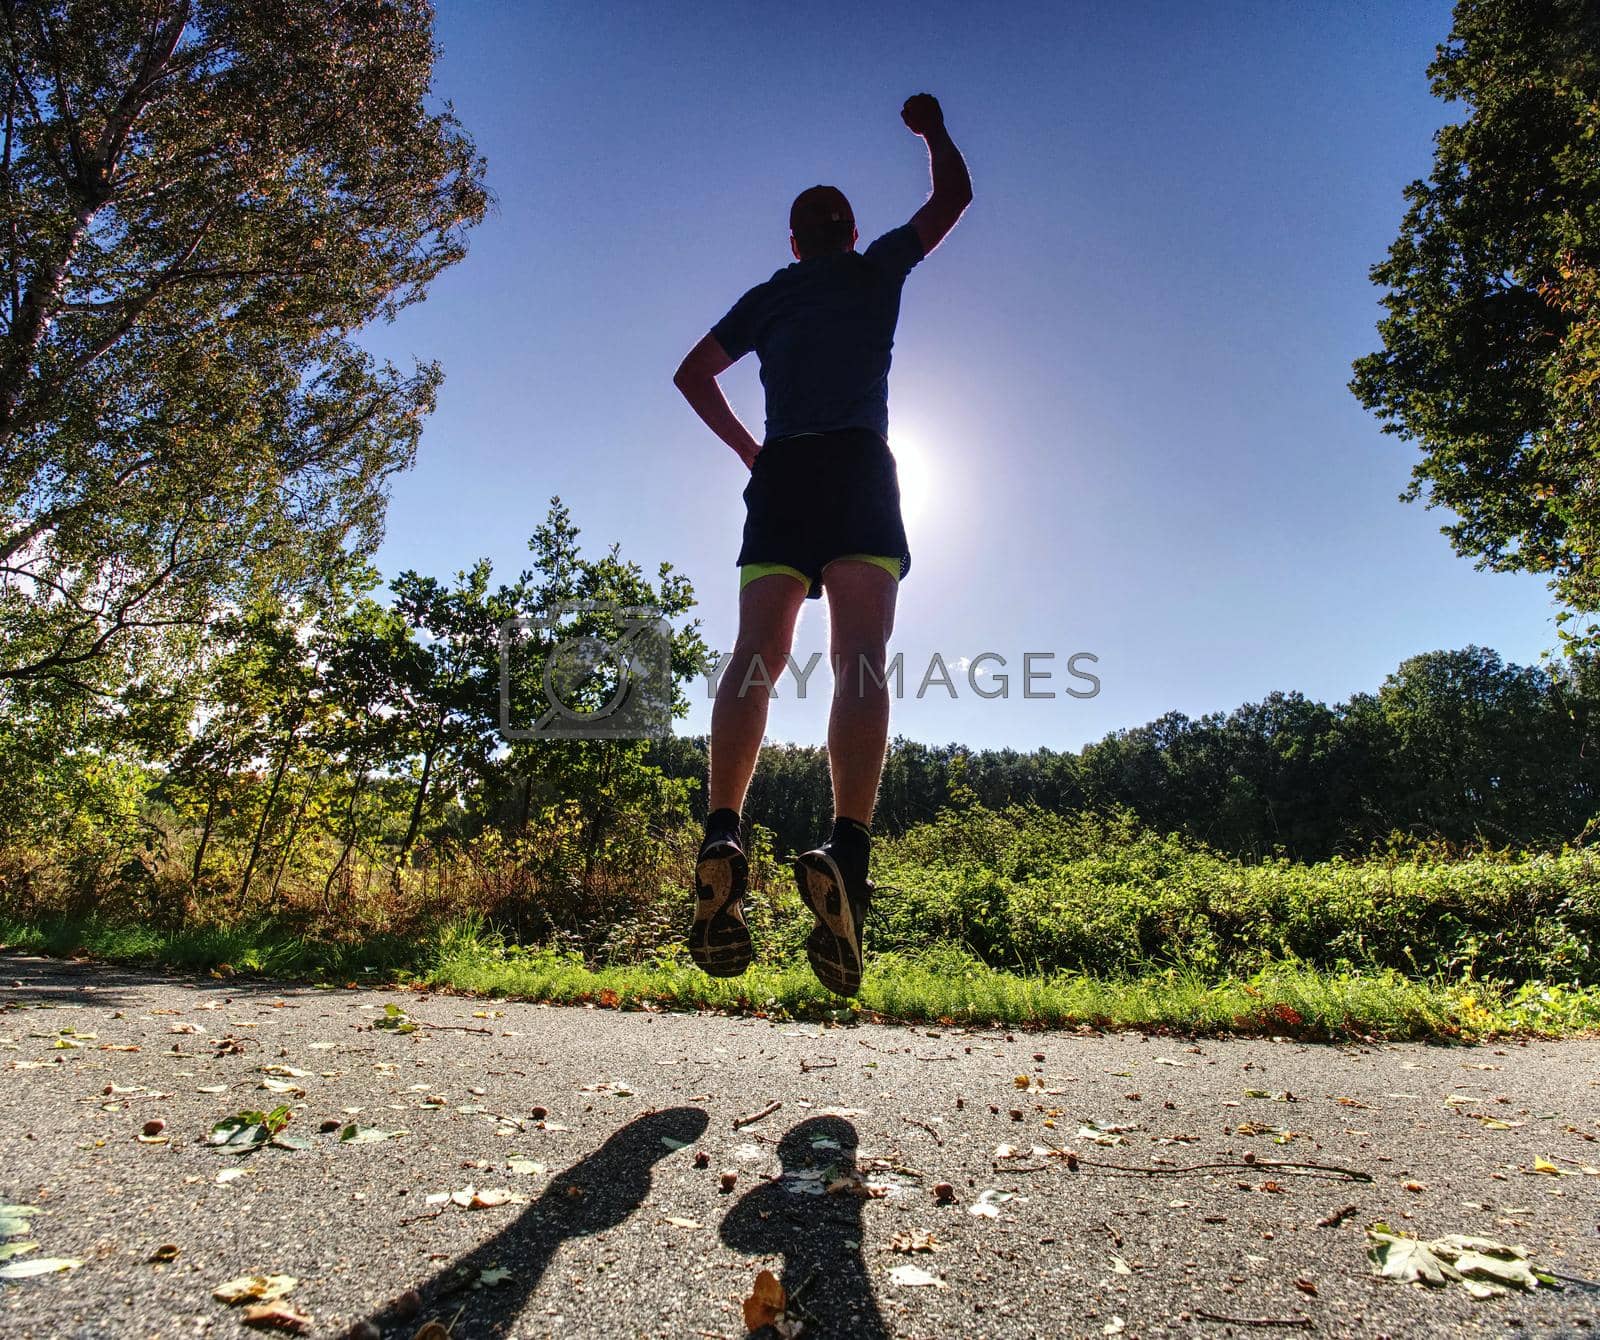 Royalty free image of Action man, full of strength sportsman wearing shorts and sneakers,  by rdonar2